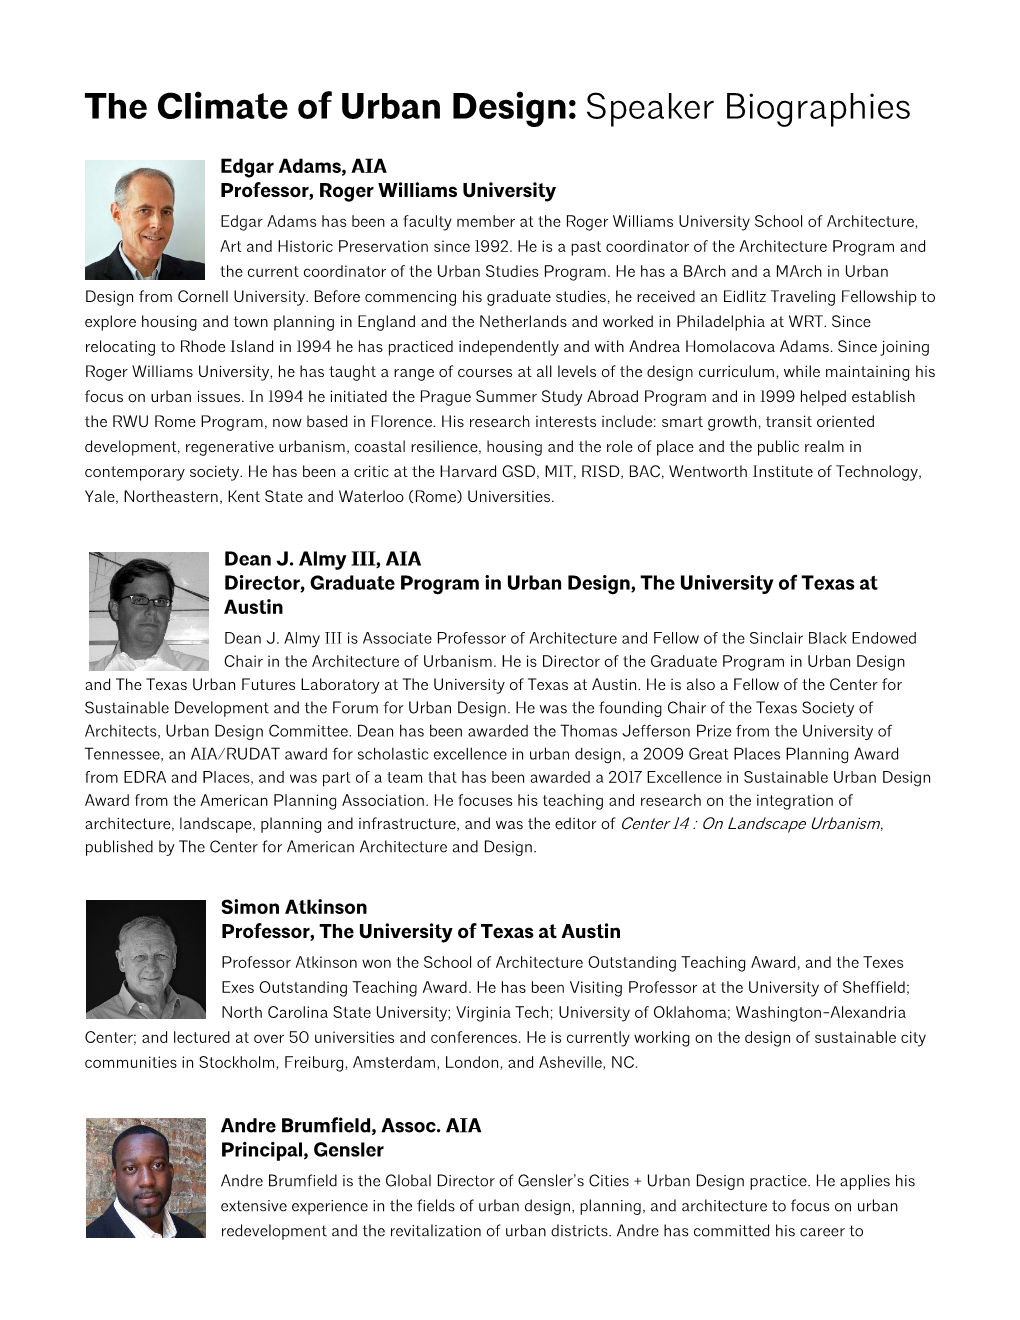 The Climate of Urban Design: Speaker Biographies